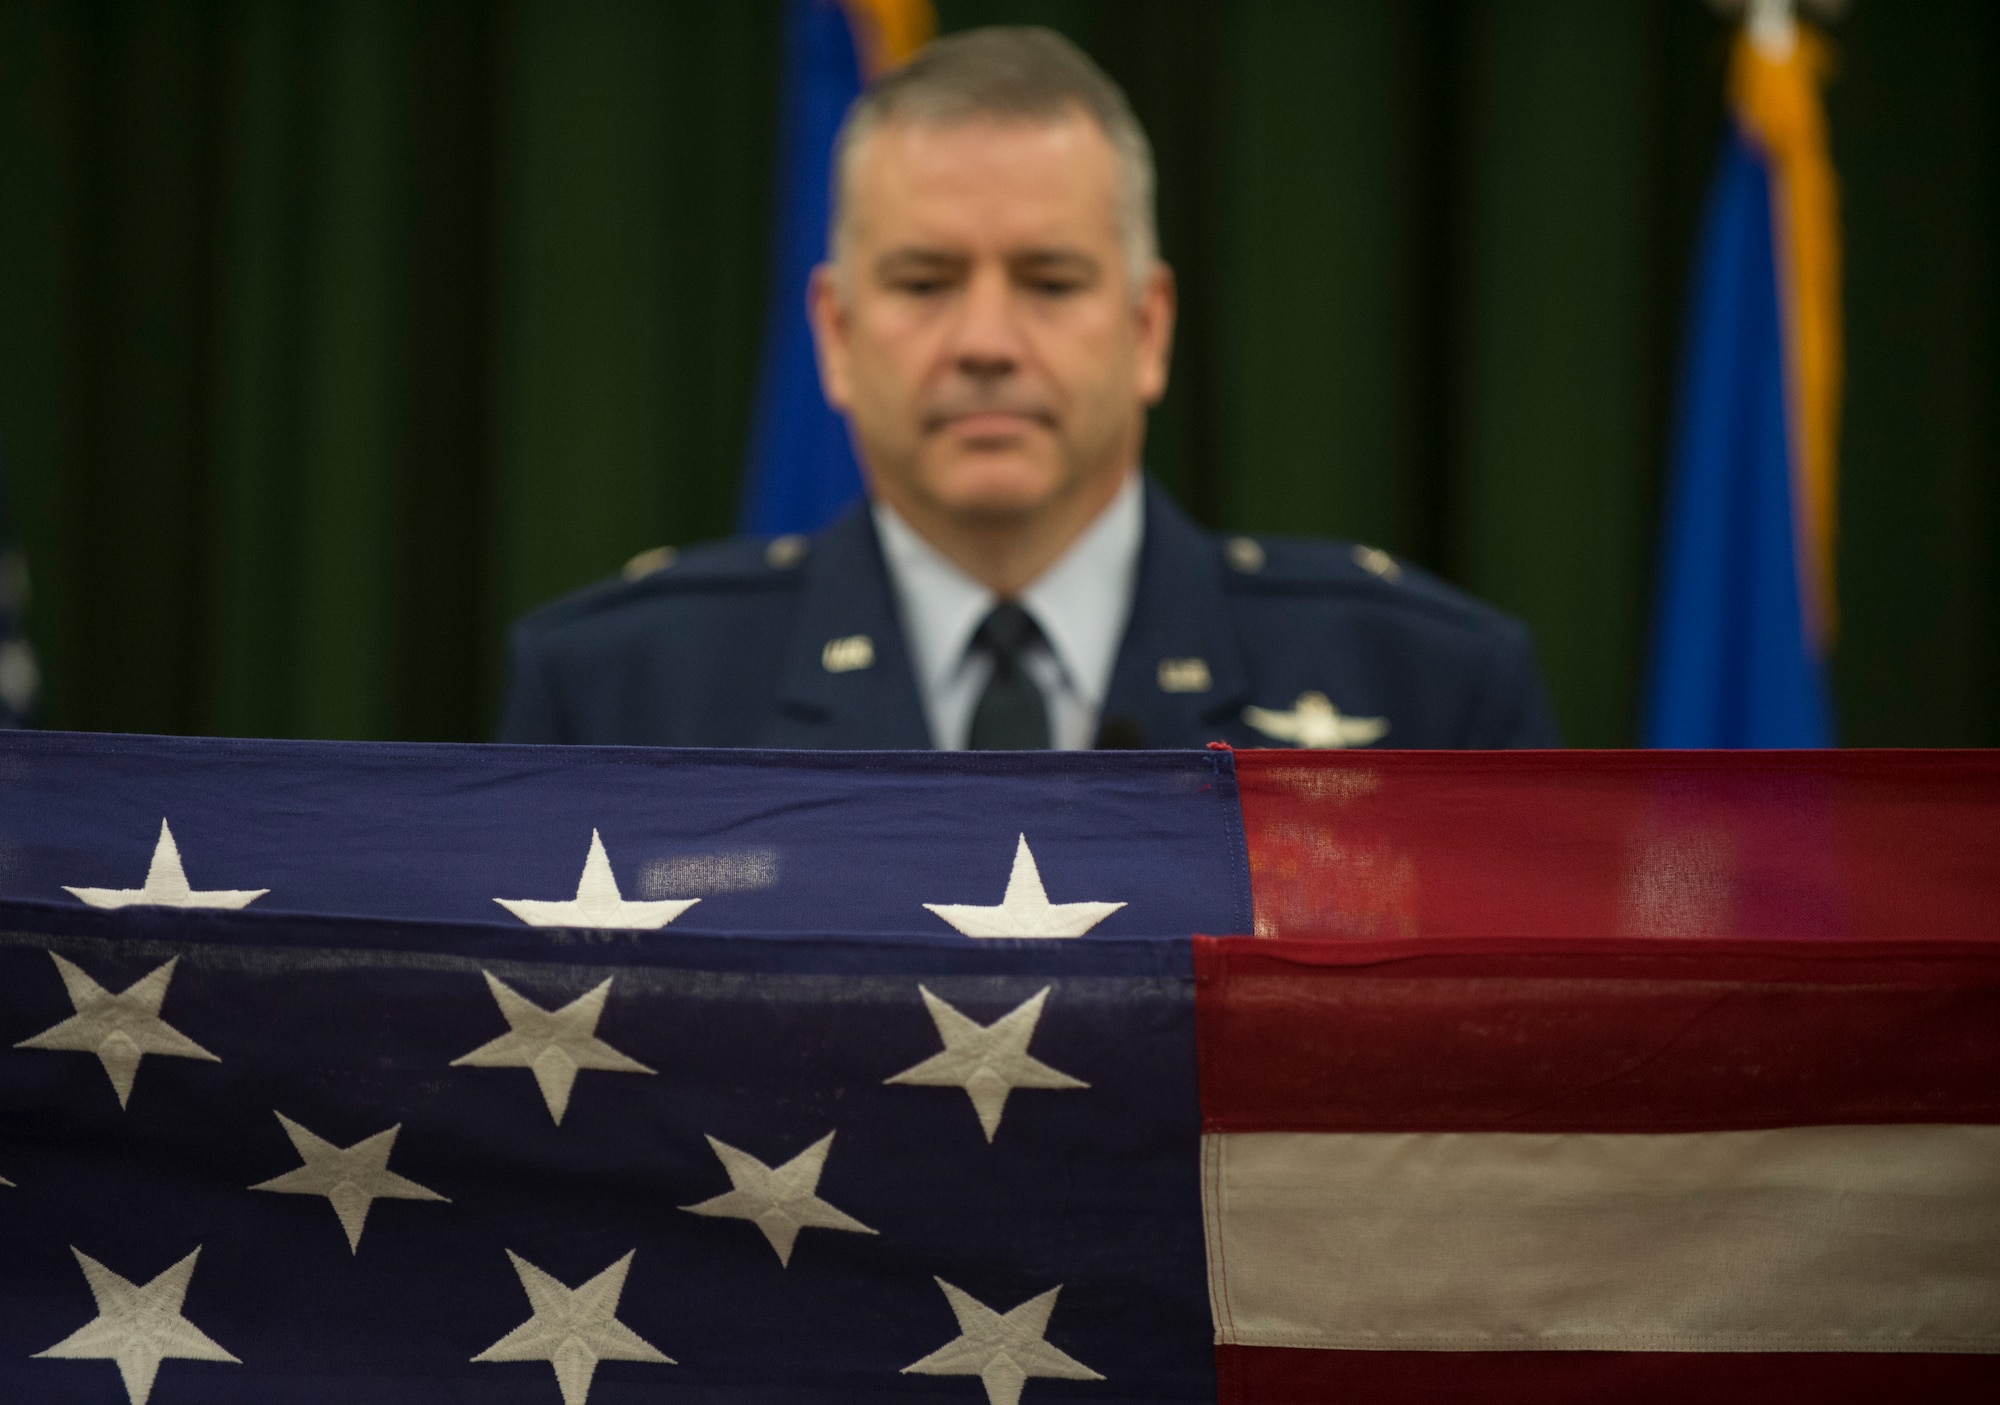 Brig. Gen. Mitchel Butikofer, Air Forces Cyber vice commander, stands at the position of attention as the U.S. flag is folded during his retirement ceremony at Joint Base San Antonio-Lackland, Texas, June 1, 2018. Butikofer retired after 29 years of service. (U.S. Air Force photo by Tech. Sgt. R.J. Biermann)